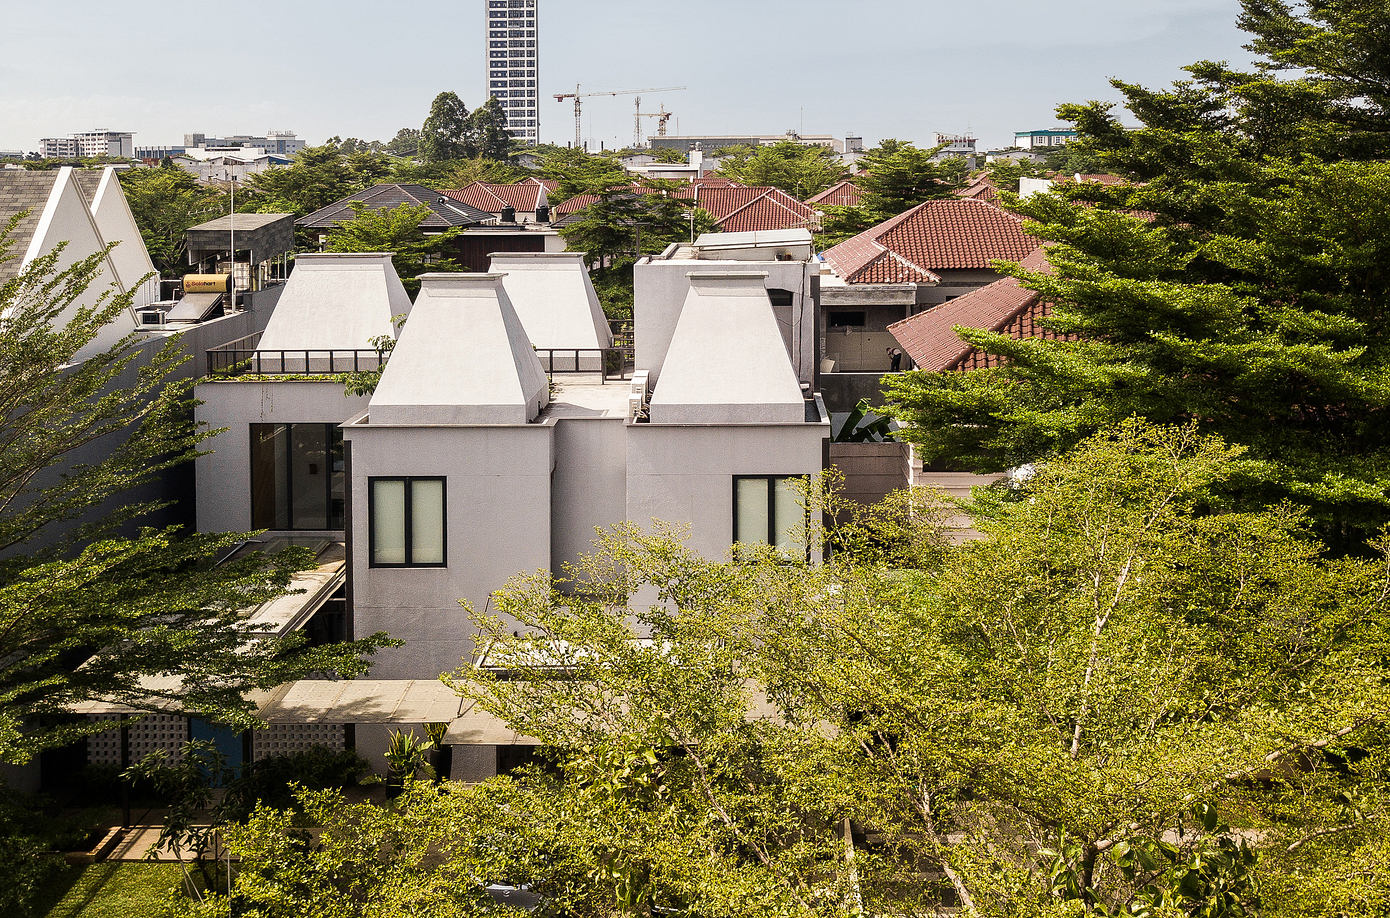 Stupa House: Architectural Masterpiece Inspired by Indonesian Temples